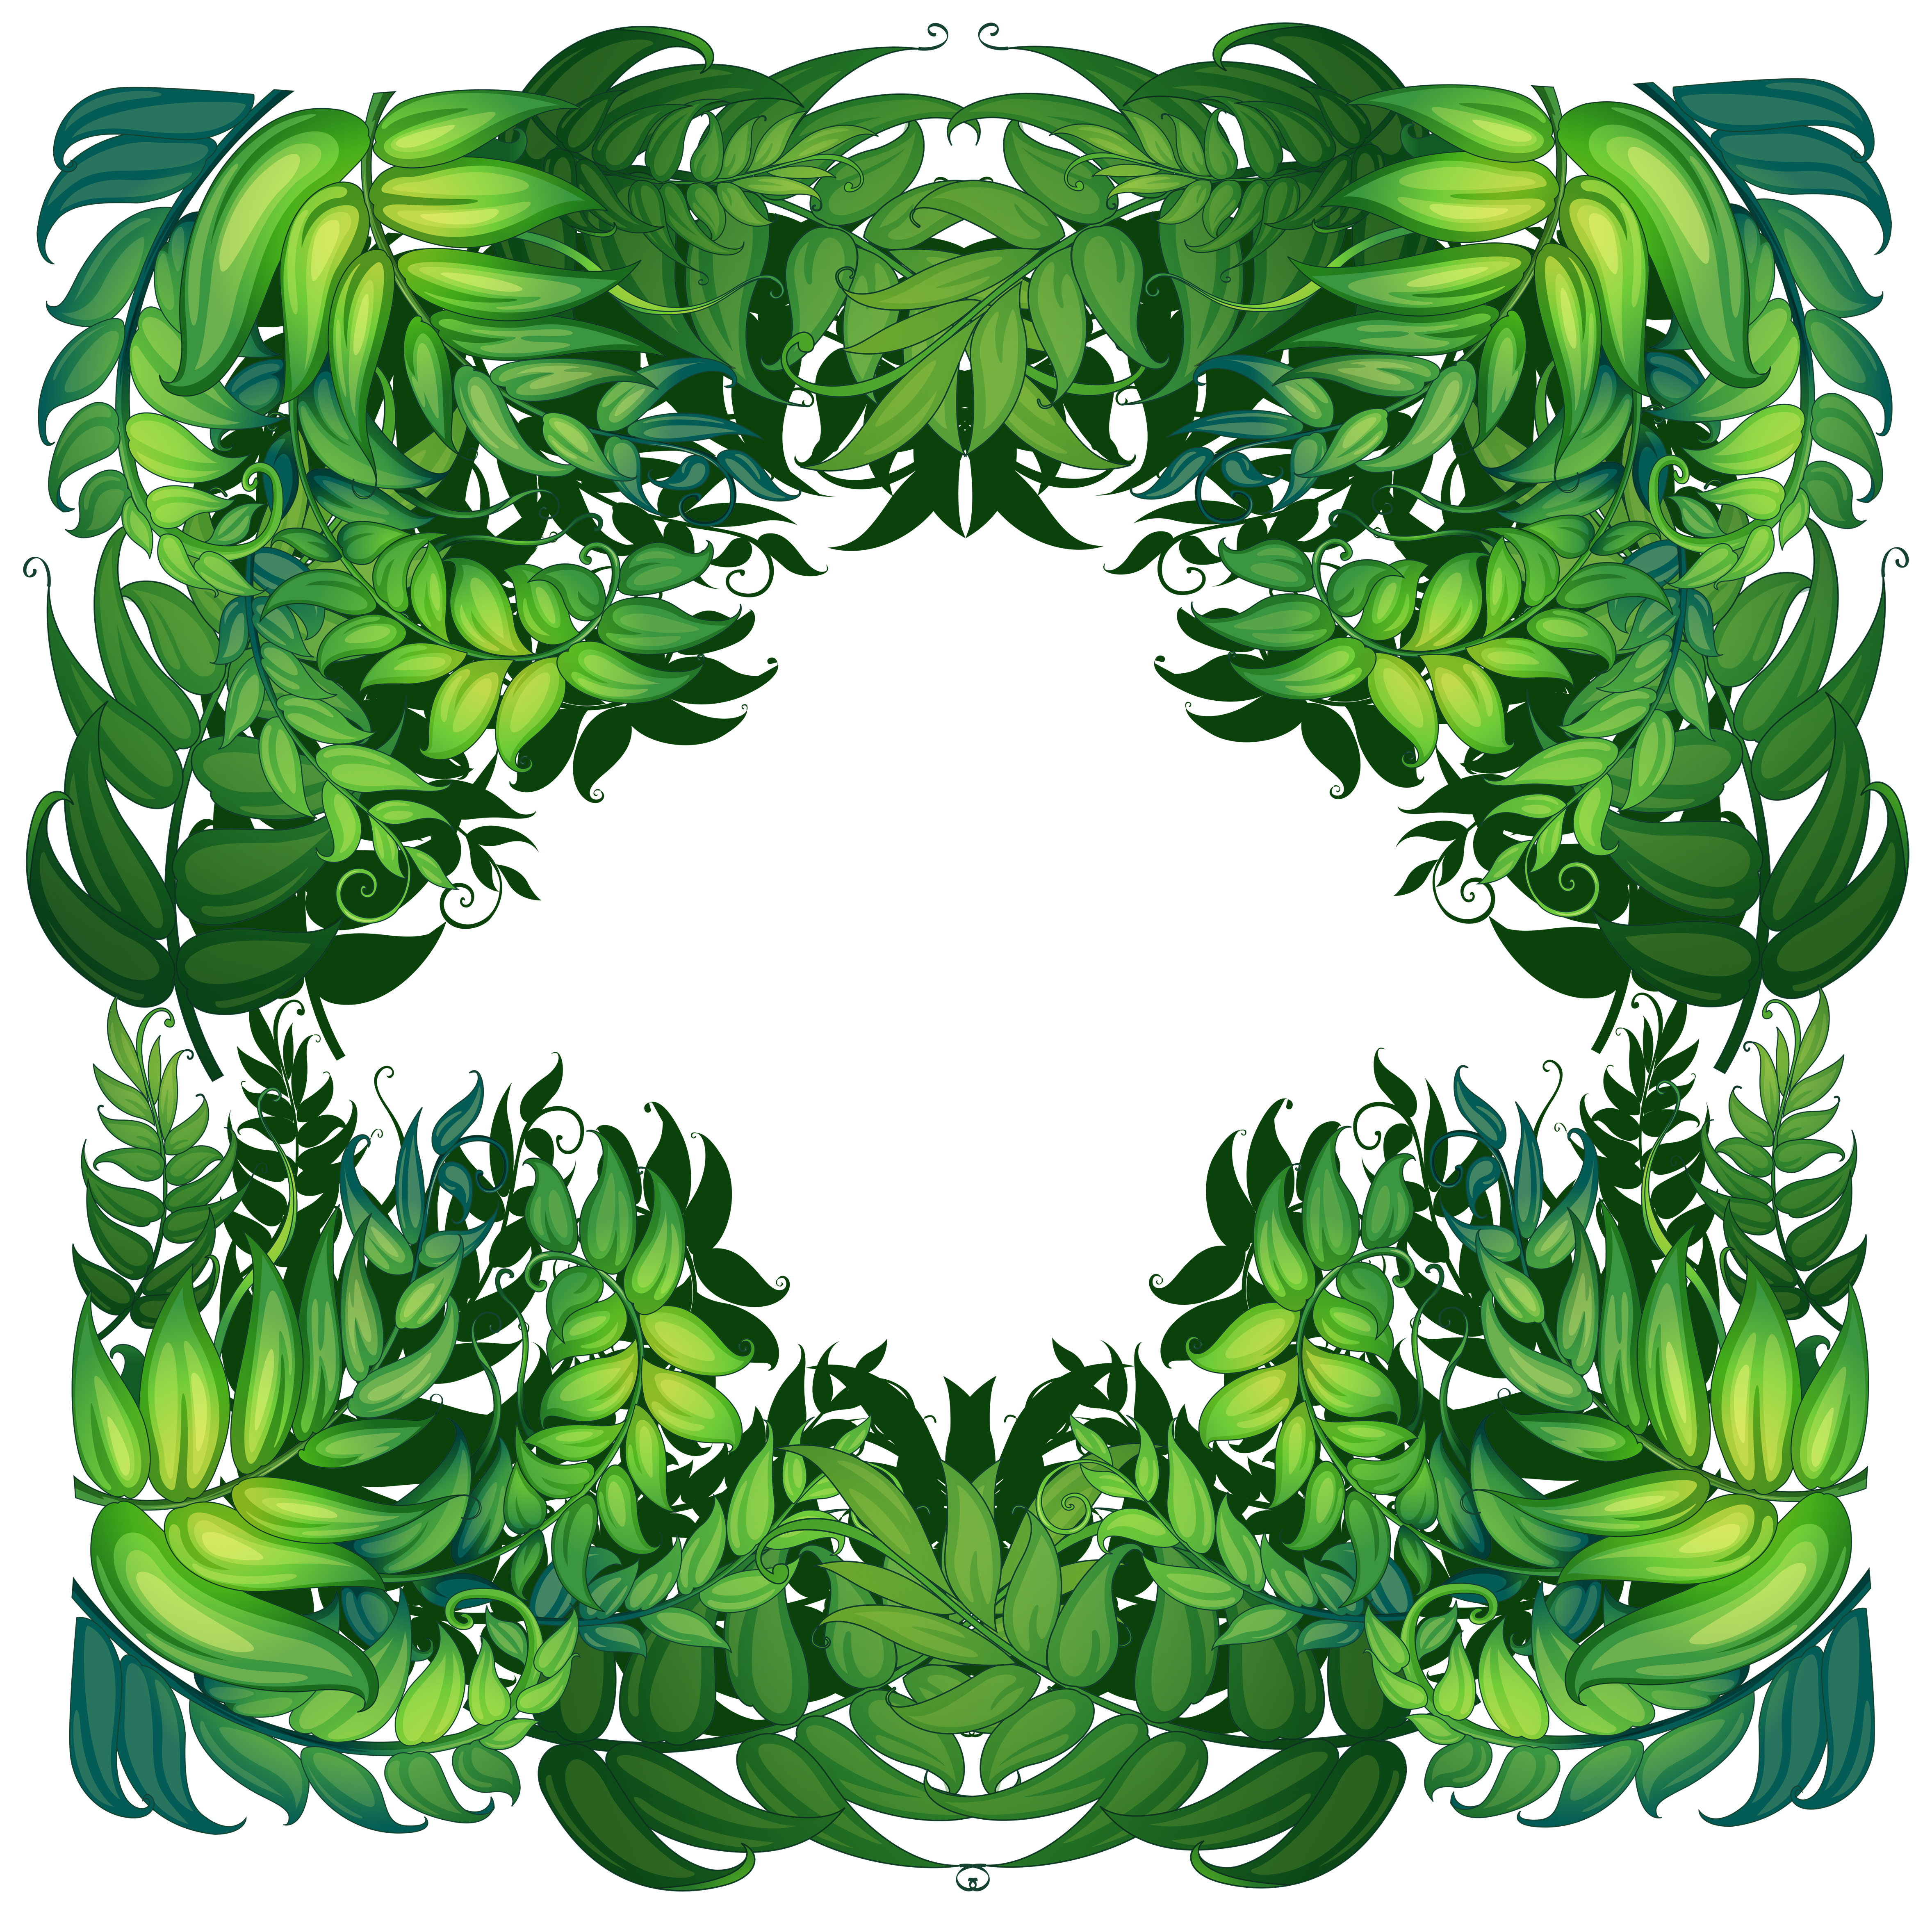 Border template with green leaves - Download Free Vectors, Clipart Graphics & Vector Art